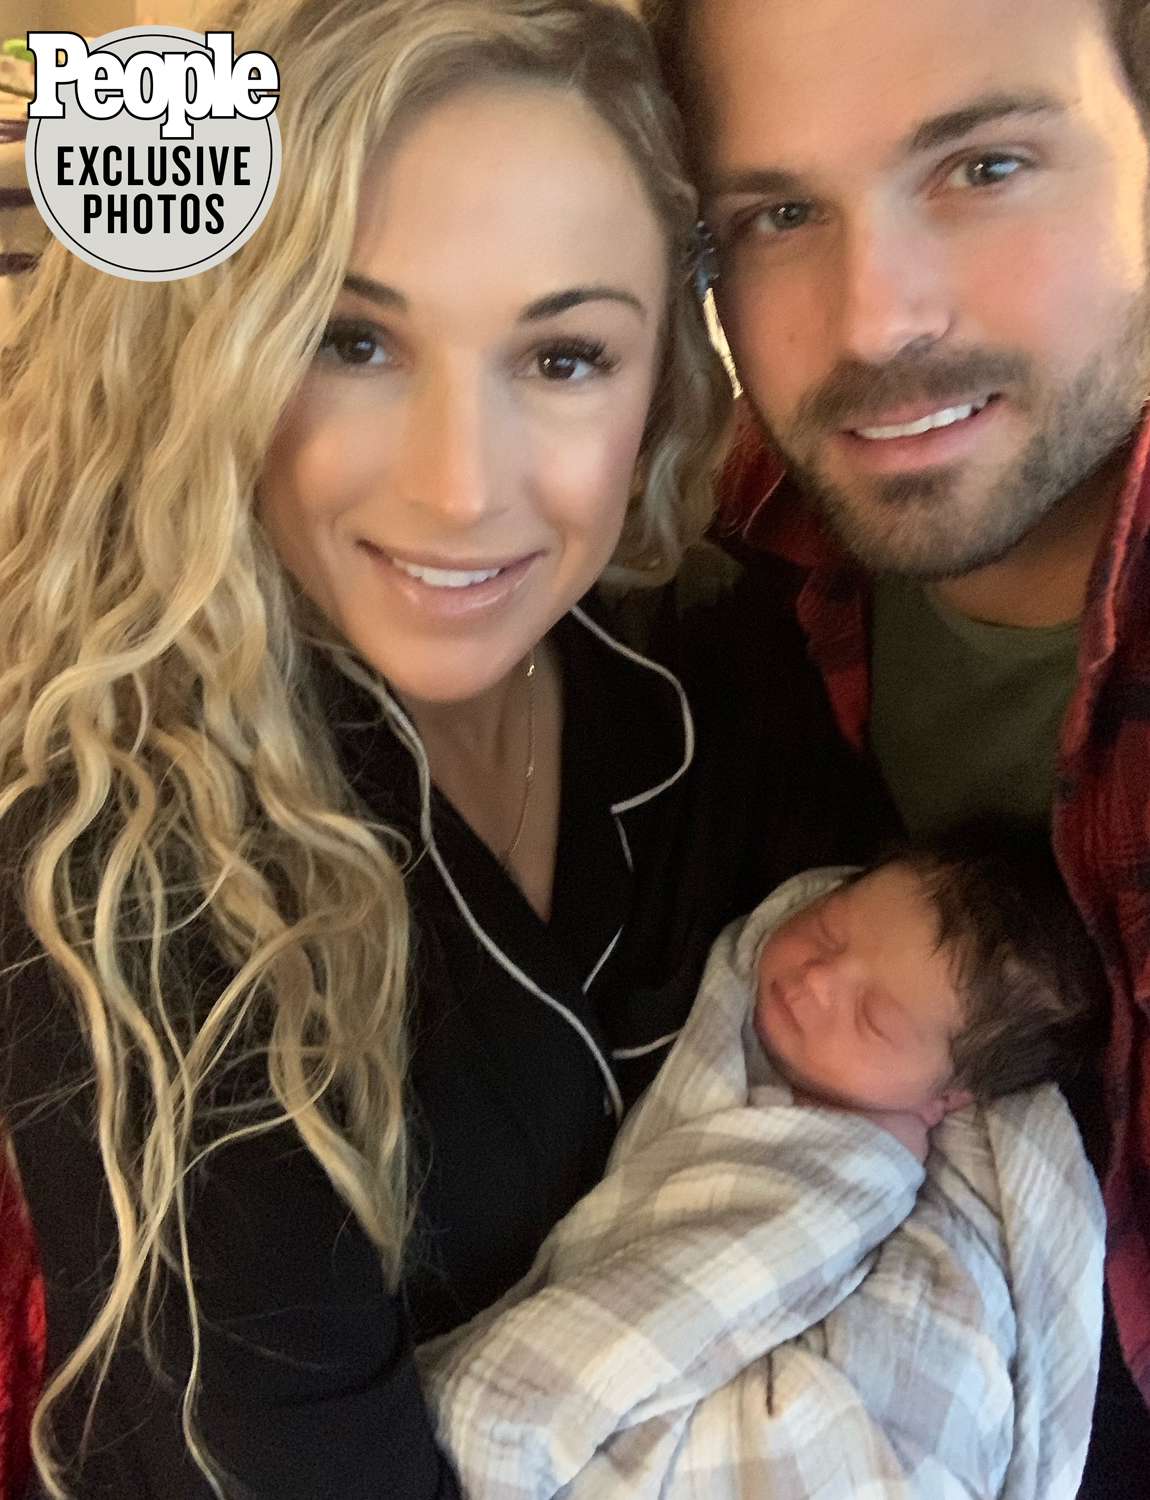 <p>Chuck Wicks and wife Kasi welcomed their first child together, a son, on Friday, Dec. 4, his rep confirmed exclusively to PEOPLE.</p>
                            <p>Tucker, who weighed 8 lbs., 13 oz., and measured 18.5 inches long, was born at 2:30 p.m.in Nashville, Tennessee, arriving with a full head of dark hair.</p>
                            <p>"Kasi and I are beside ourselves. The IVF process is an extremely emotional one and so many many tears were shed of joy and love when Tucker arrived into the world healthy and perfect," said Wicks, who dropped his new single "Old with You" the day Kasi (whom the song is about) was induced. "We can't wait to shower him with love every single day. Also... Kasi is a rockstar!"</p>
                            